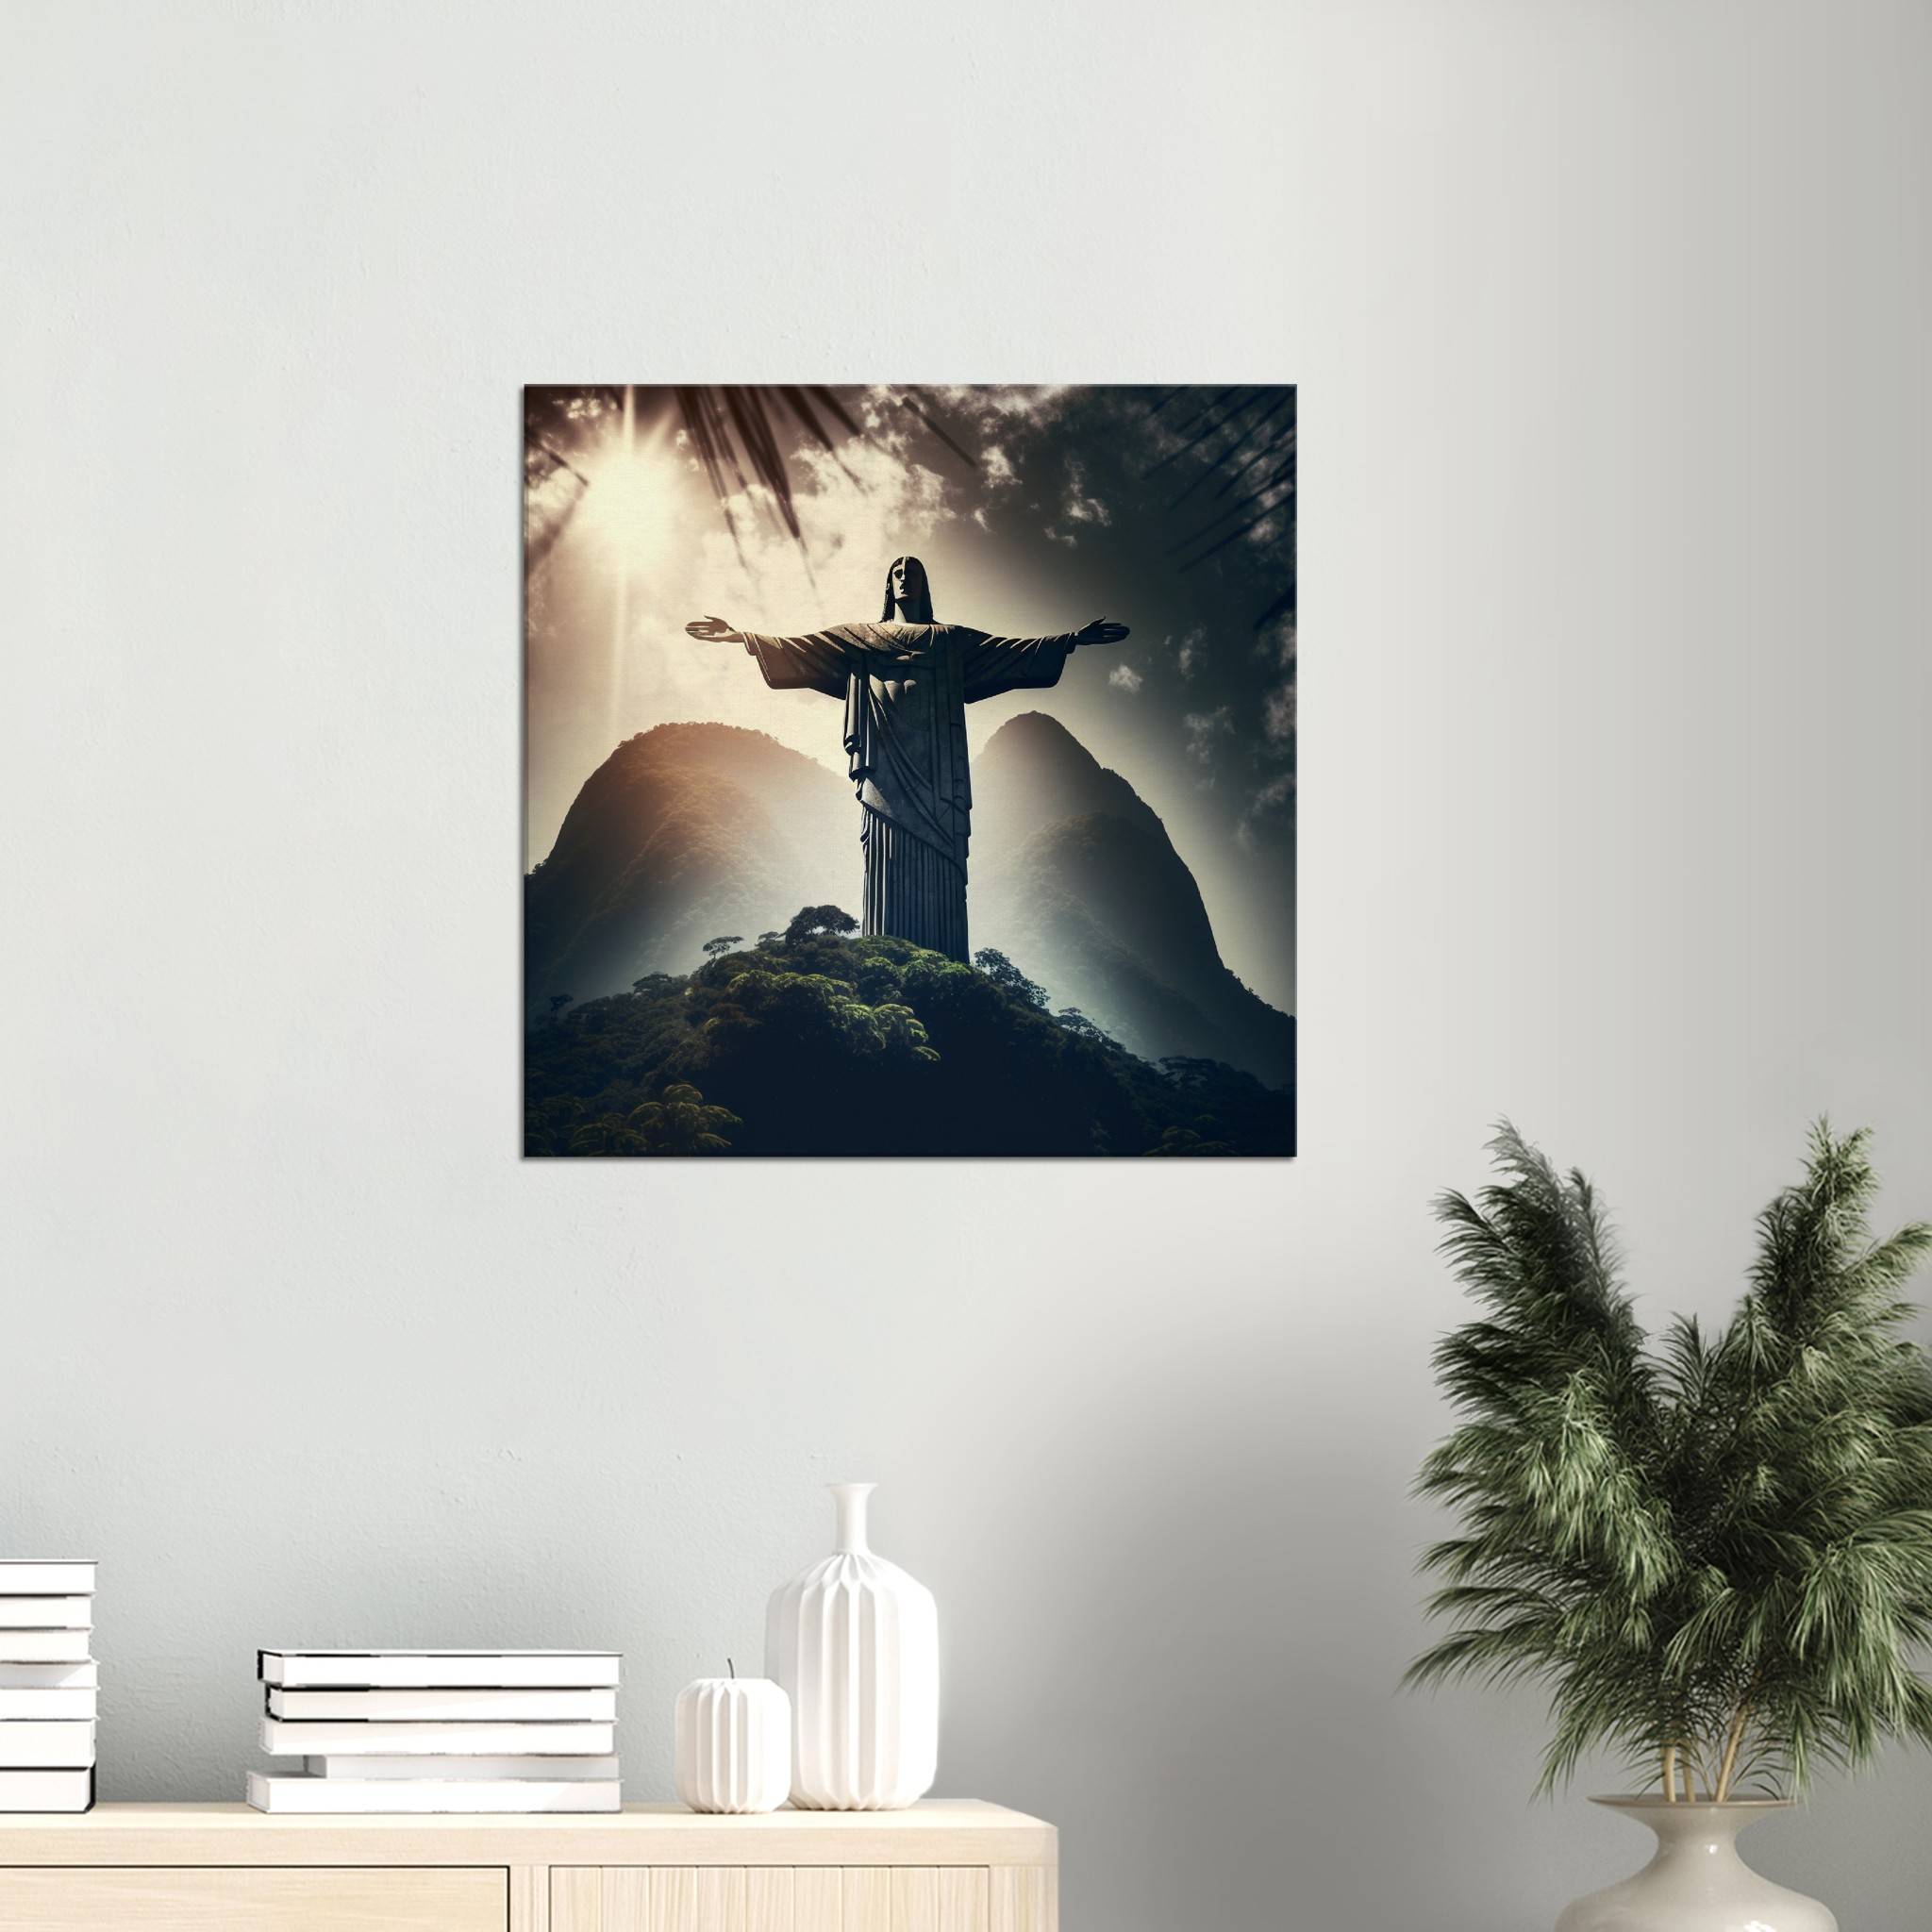 Christ the Redeemer 12 / 60 x 60cm (Canvas Print) Canvas Print Canvas reproduction The Pianist Print On Demand Fabled Gallery https://fabledgallery.art/product/crist-redentor-12-60-x-60cm-canvas-print/